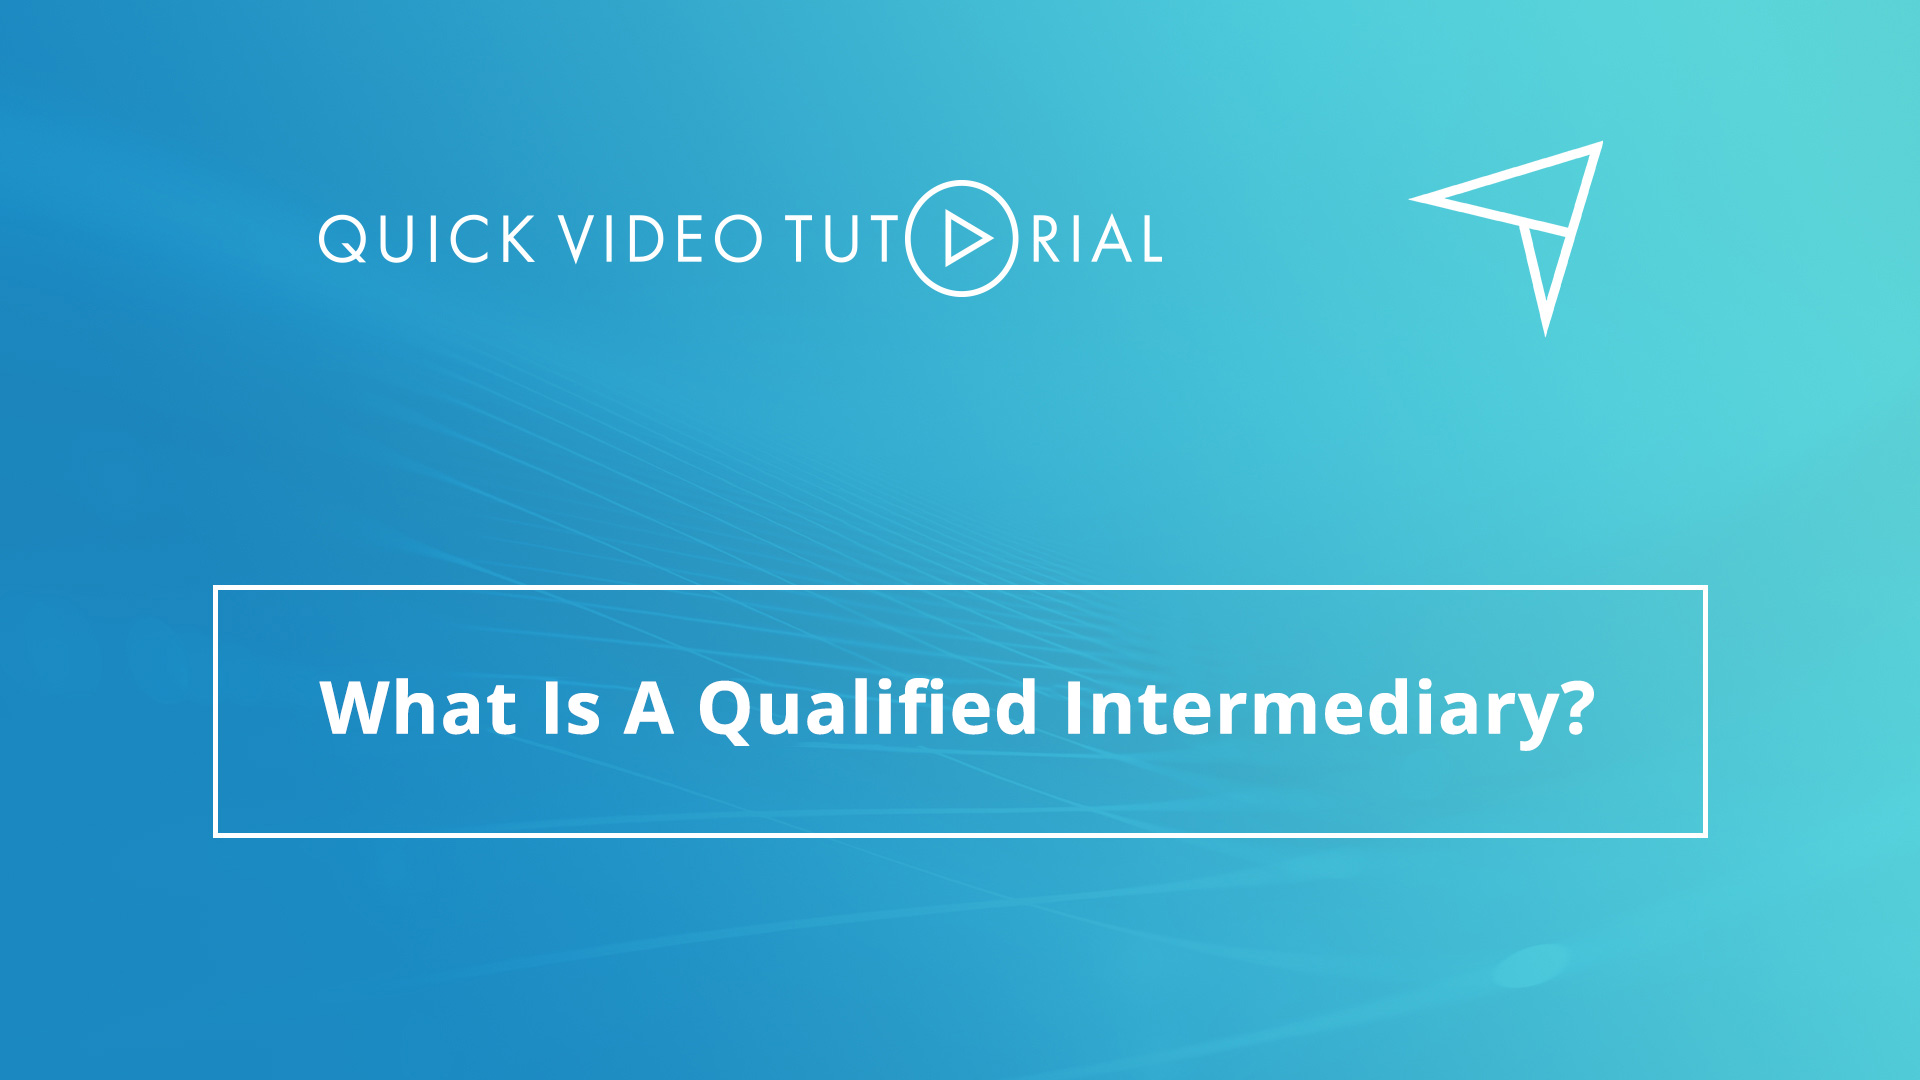 What Is A Qualified Intermediary? - Daniel Goodwin with Cindy Pham - Provident 1031